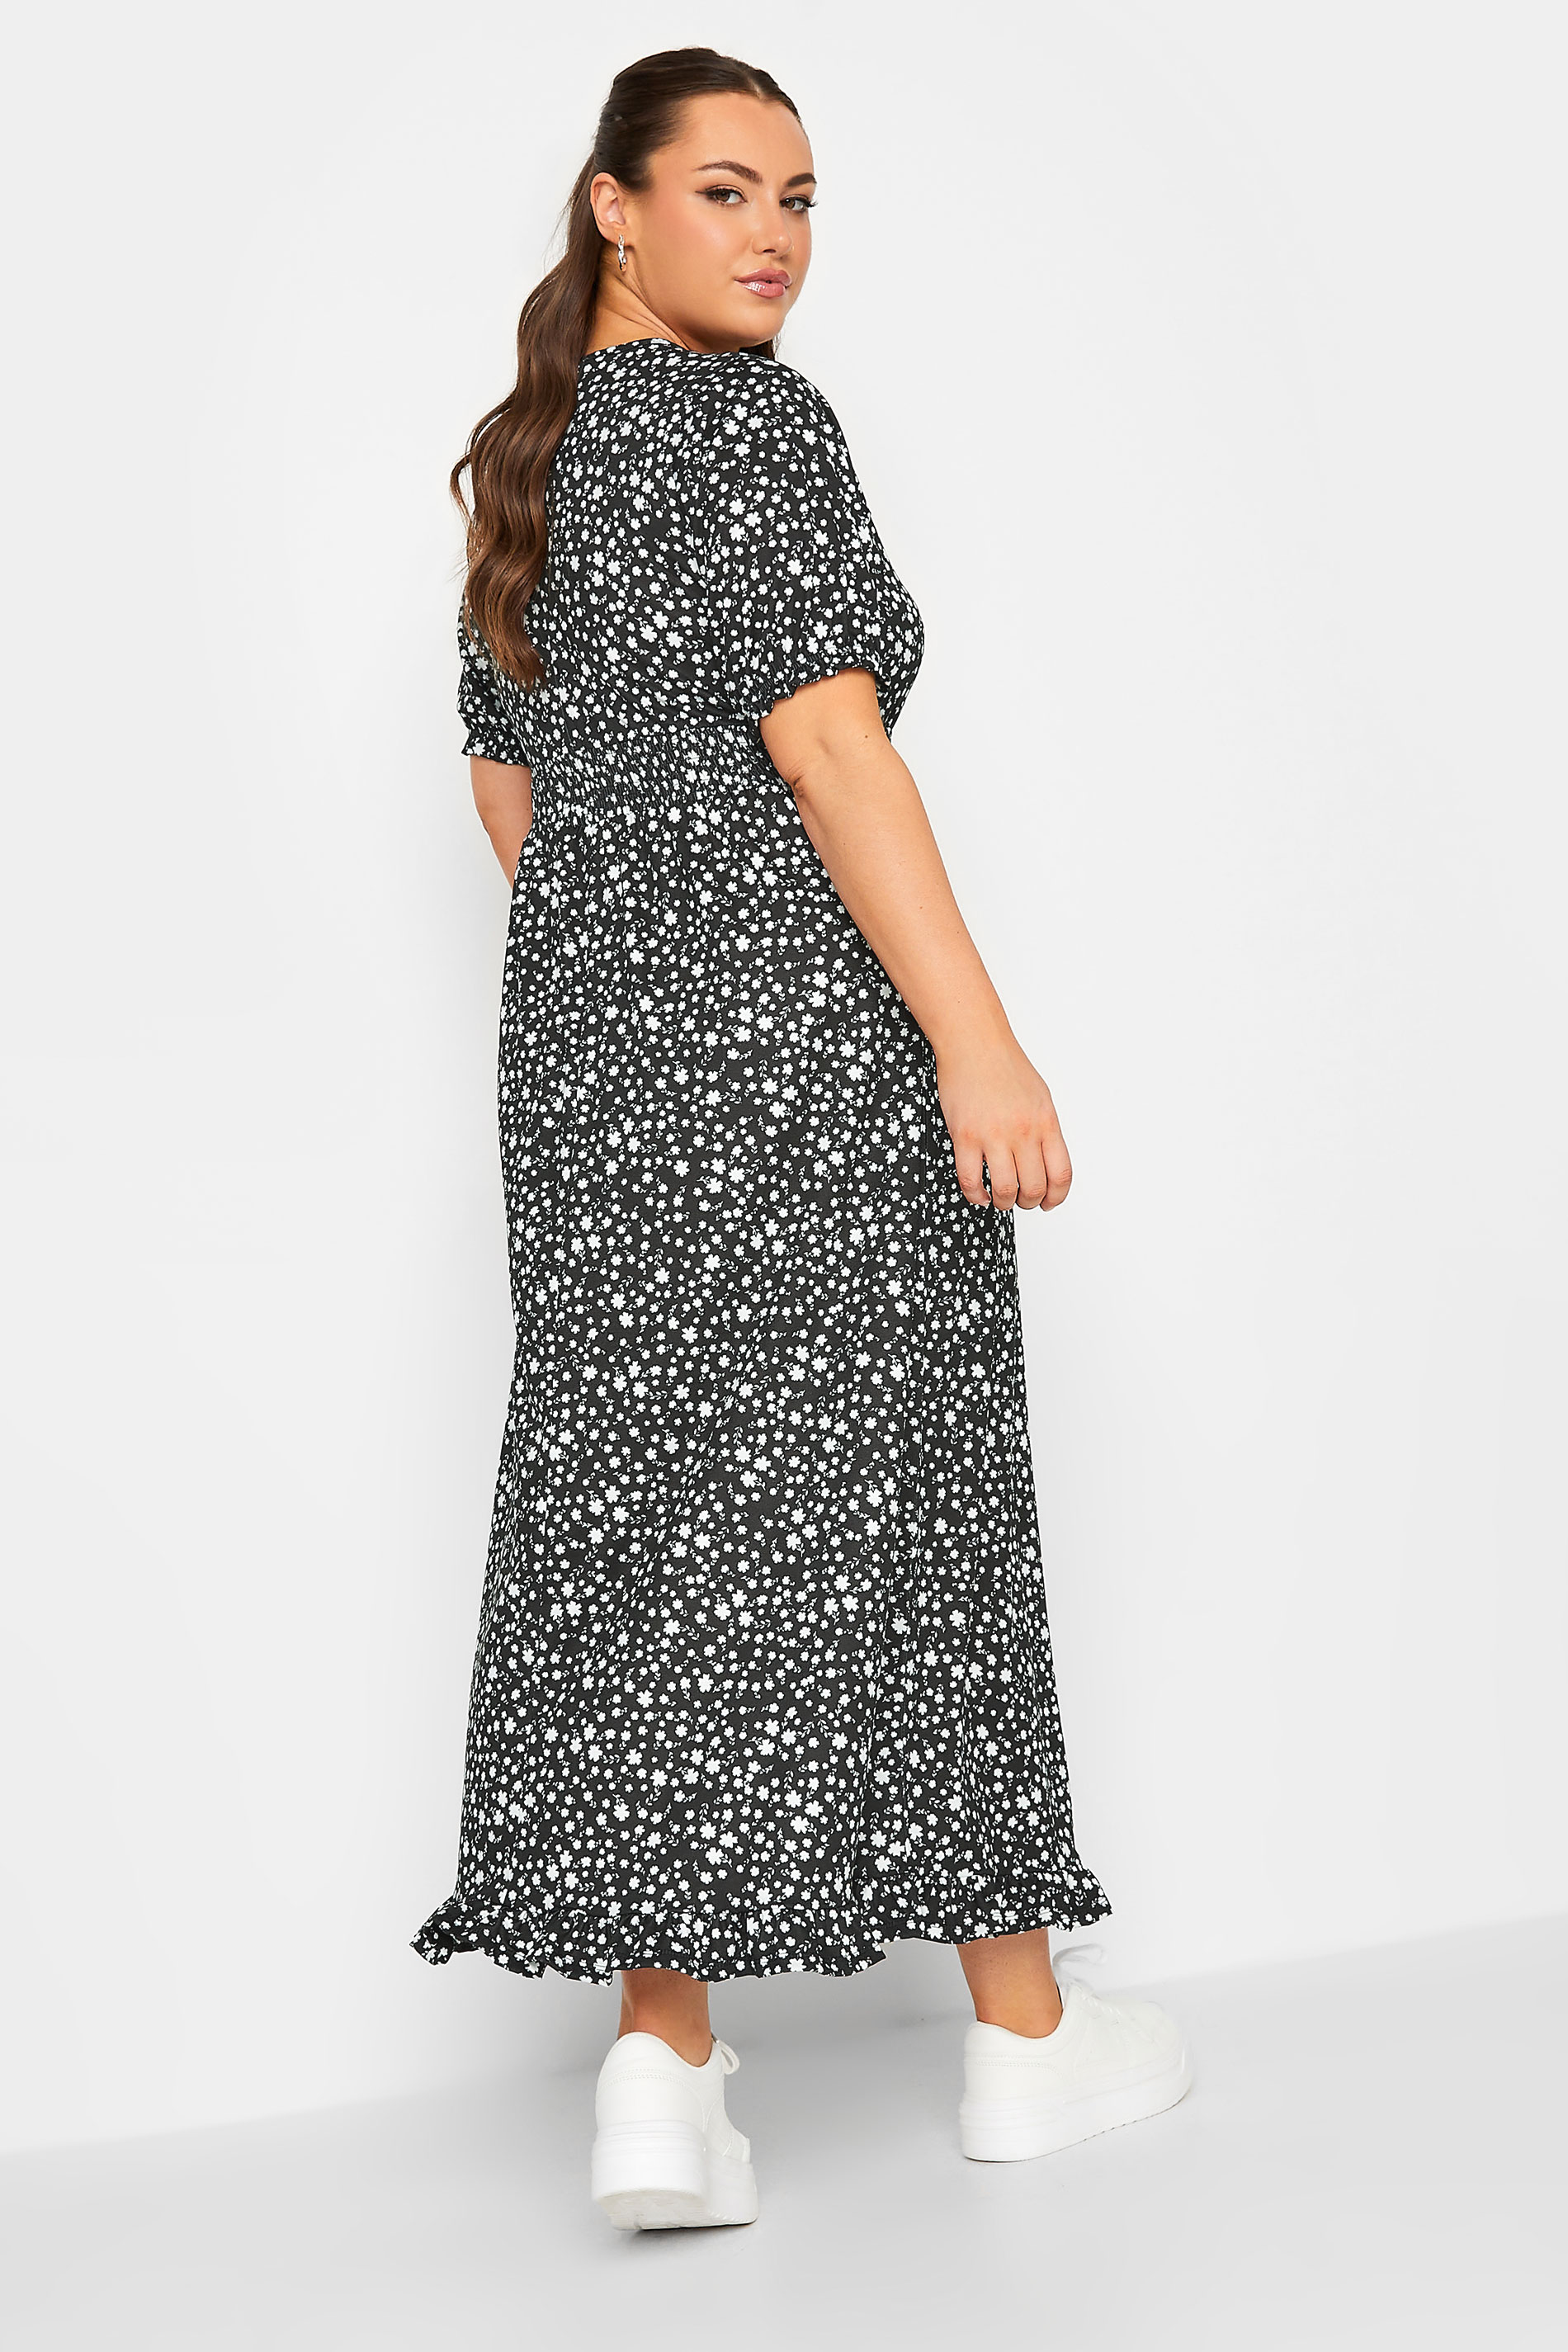 LIMITED COLLECTION Plus Size Black Floral Print Maxi Dress | Yours Clothing 3